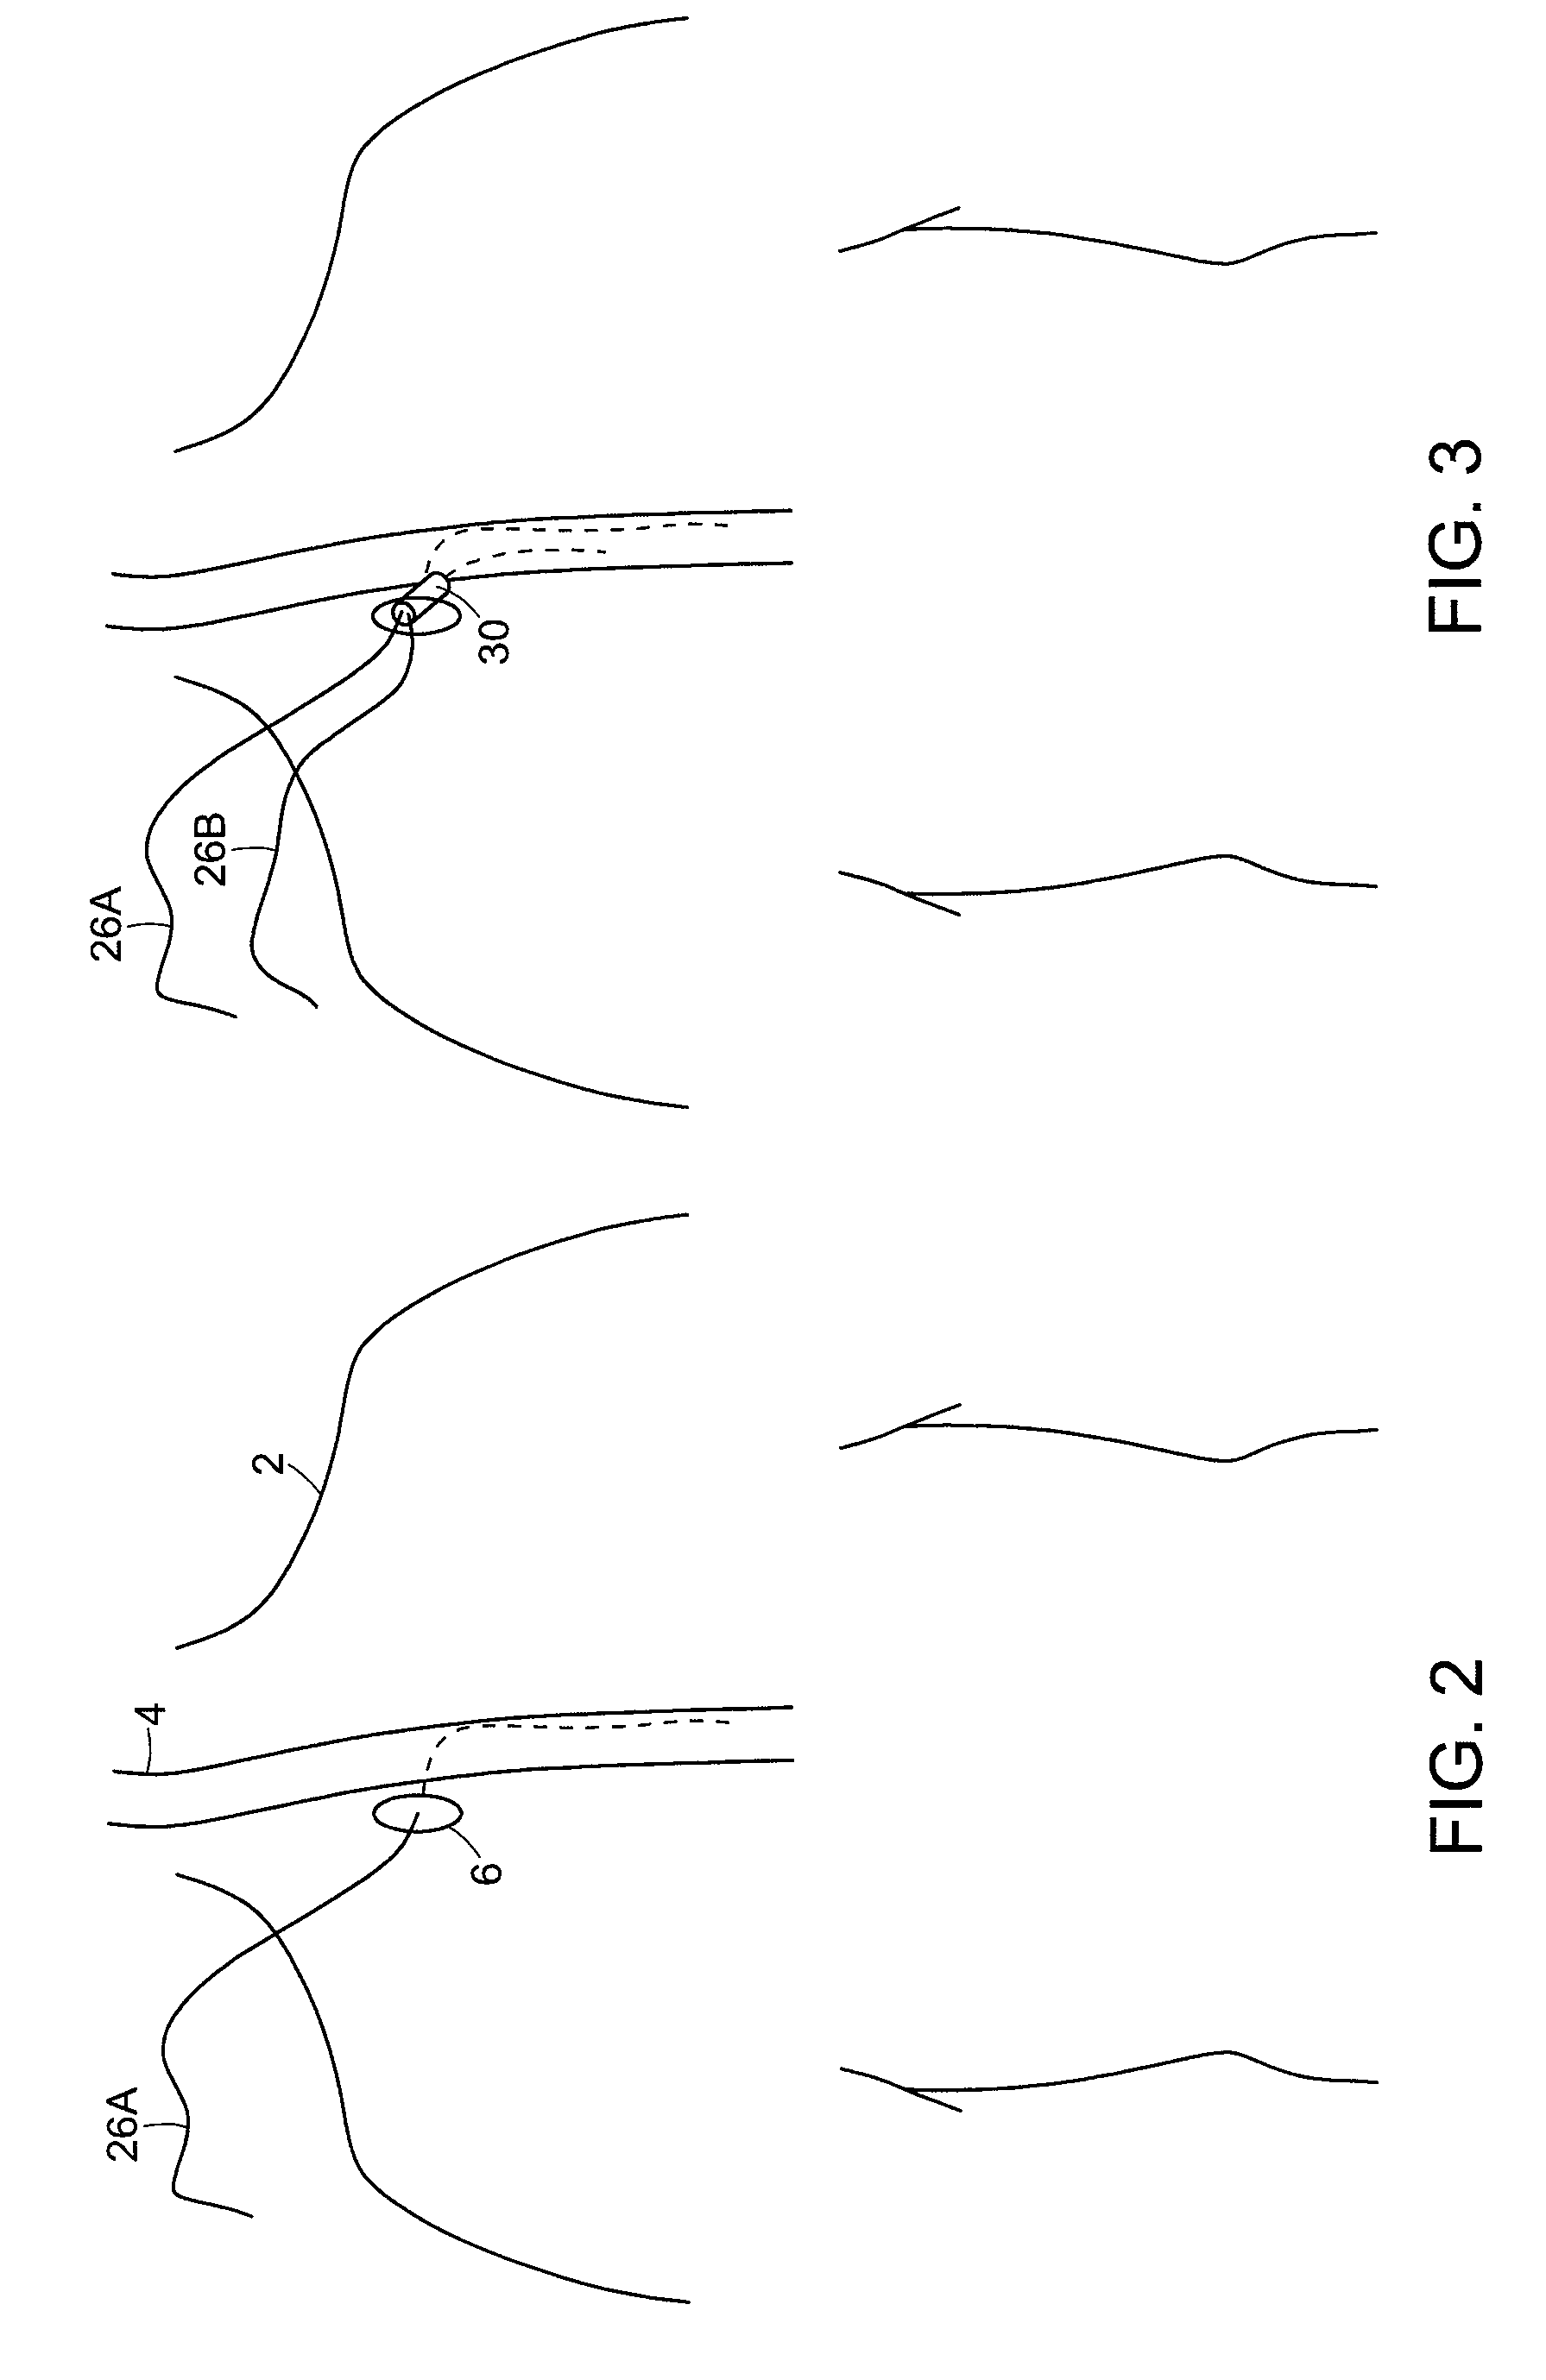 Methods and apparatus for inserting multi-lumen split-tip catheters into a blood vessel